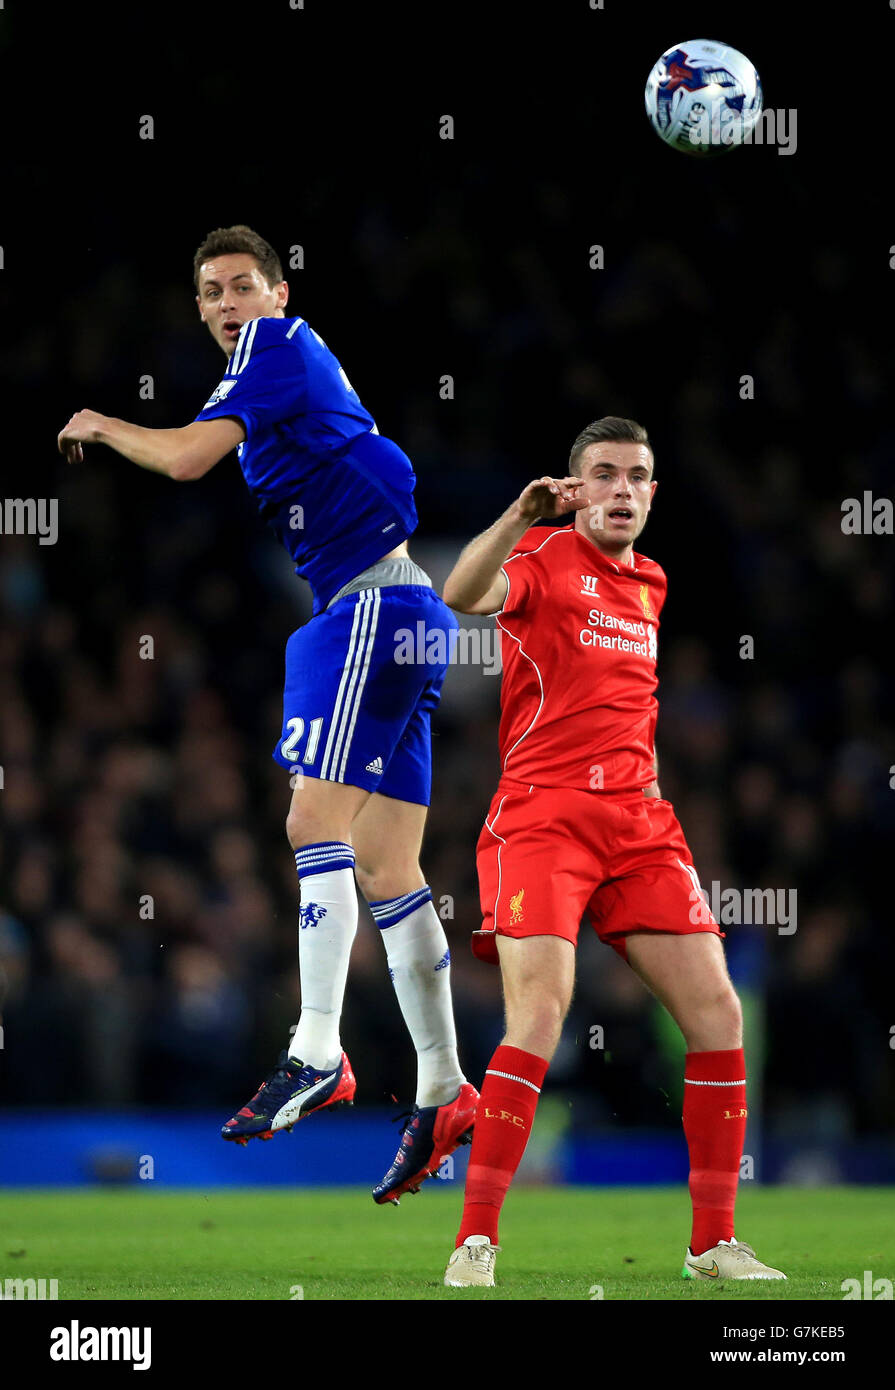 Chelsea's Nemanja Matic (left) and Liverpool's Jordan Henderson battle for the ball in the air during the Capital One Cup Semi Final, Second Leg match at Stamford Bridge, London. PRESS ASSOCIATION Photo. Picture date: Tuesday January 27, 2015. See PA story: SOCCER Chelsea. Photo credit should read: Nick Potts/PA Wire. RESTRICTIONS: Maximum 45 images during a match. No video emulation or promotion as 'live'. No use in games, competitions, merchandise, betting or single club/player services. No use with unofficial audio, video, data, fixtures or club/league Stock Photo